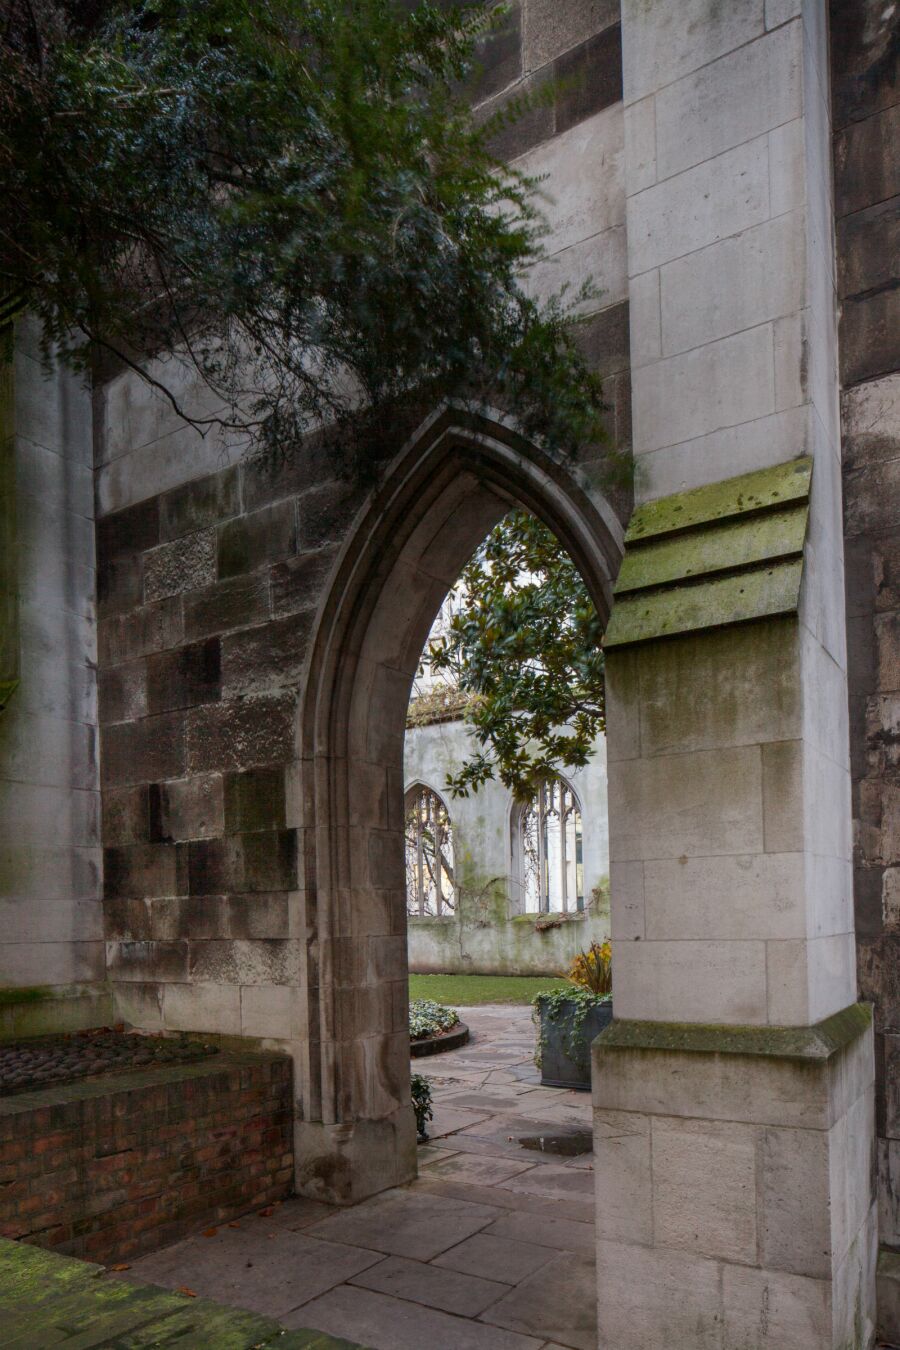 Gothic arch or doorway at  St Dunstan's church.